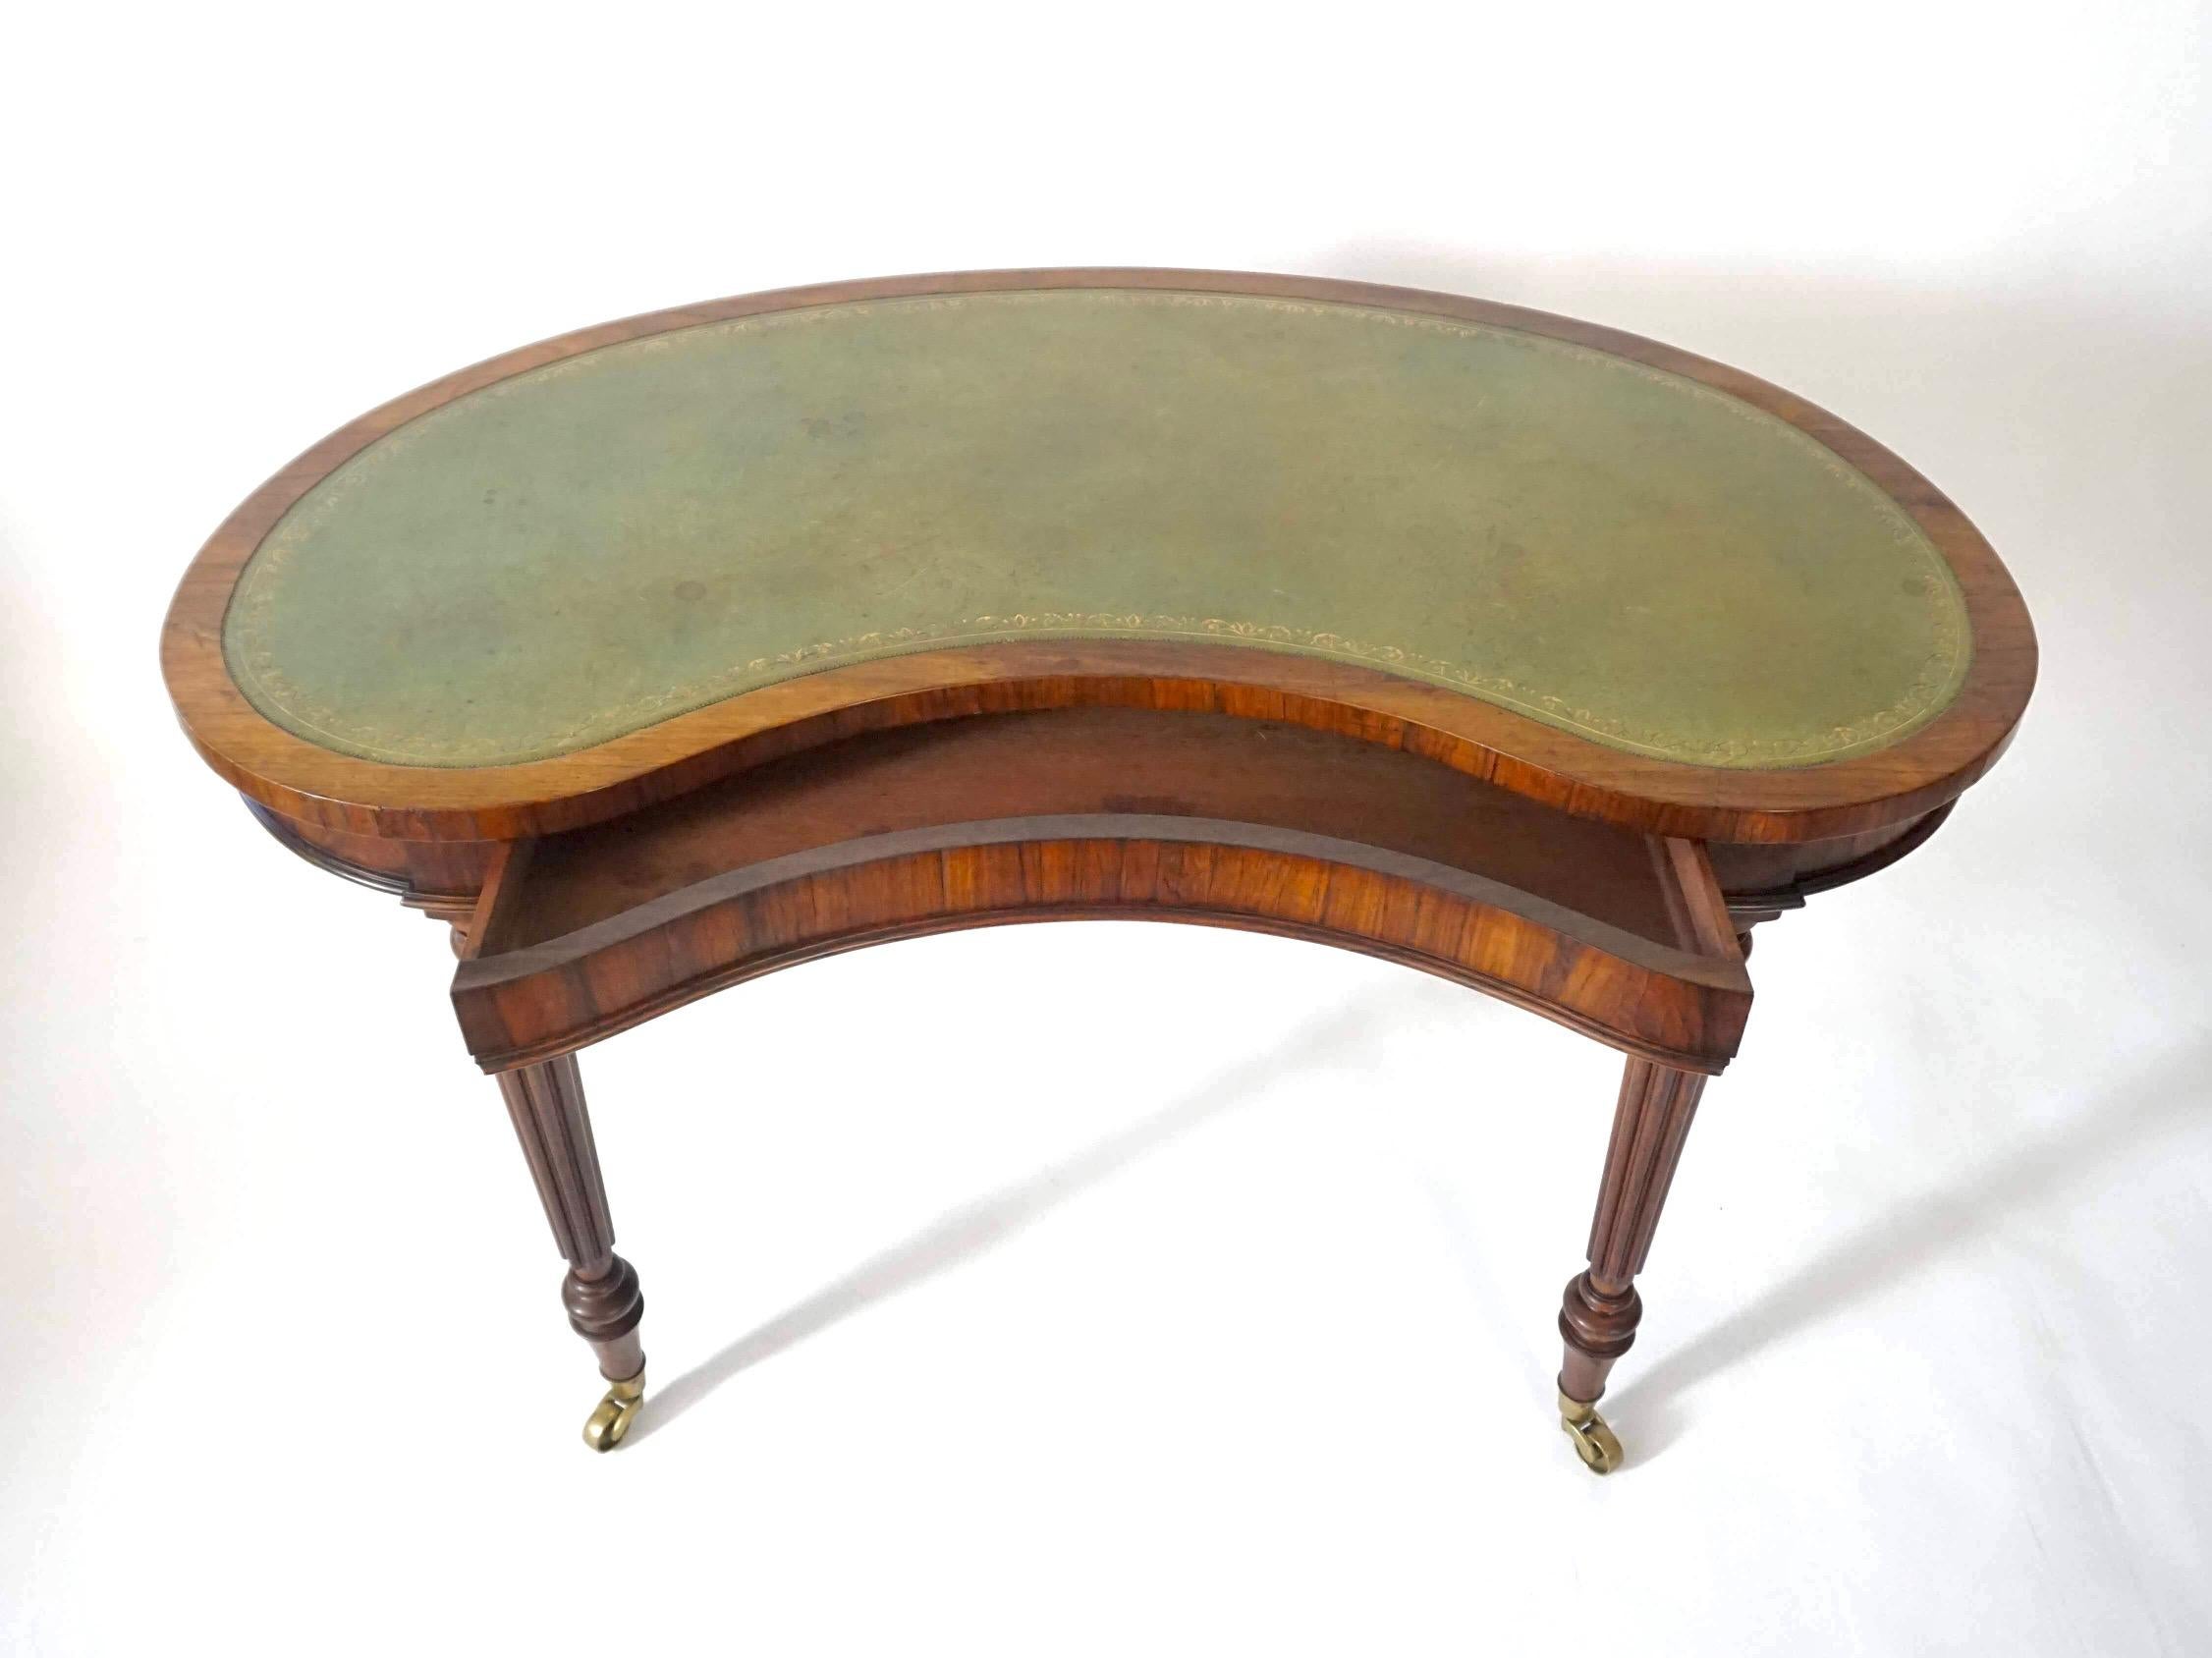 Hand-Crafted English Regency Rosewood Writing Table of Kidney Form by Gillows, circa 1815